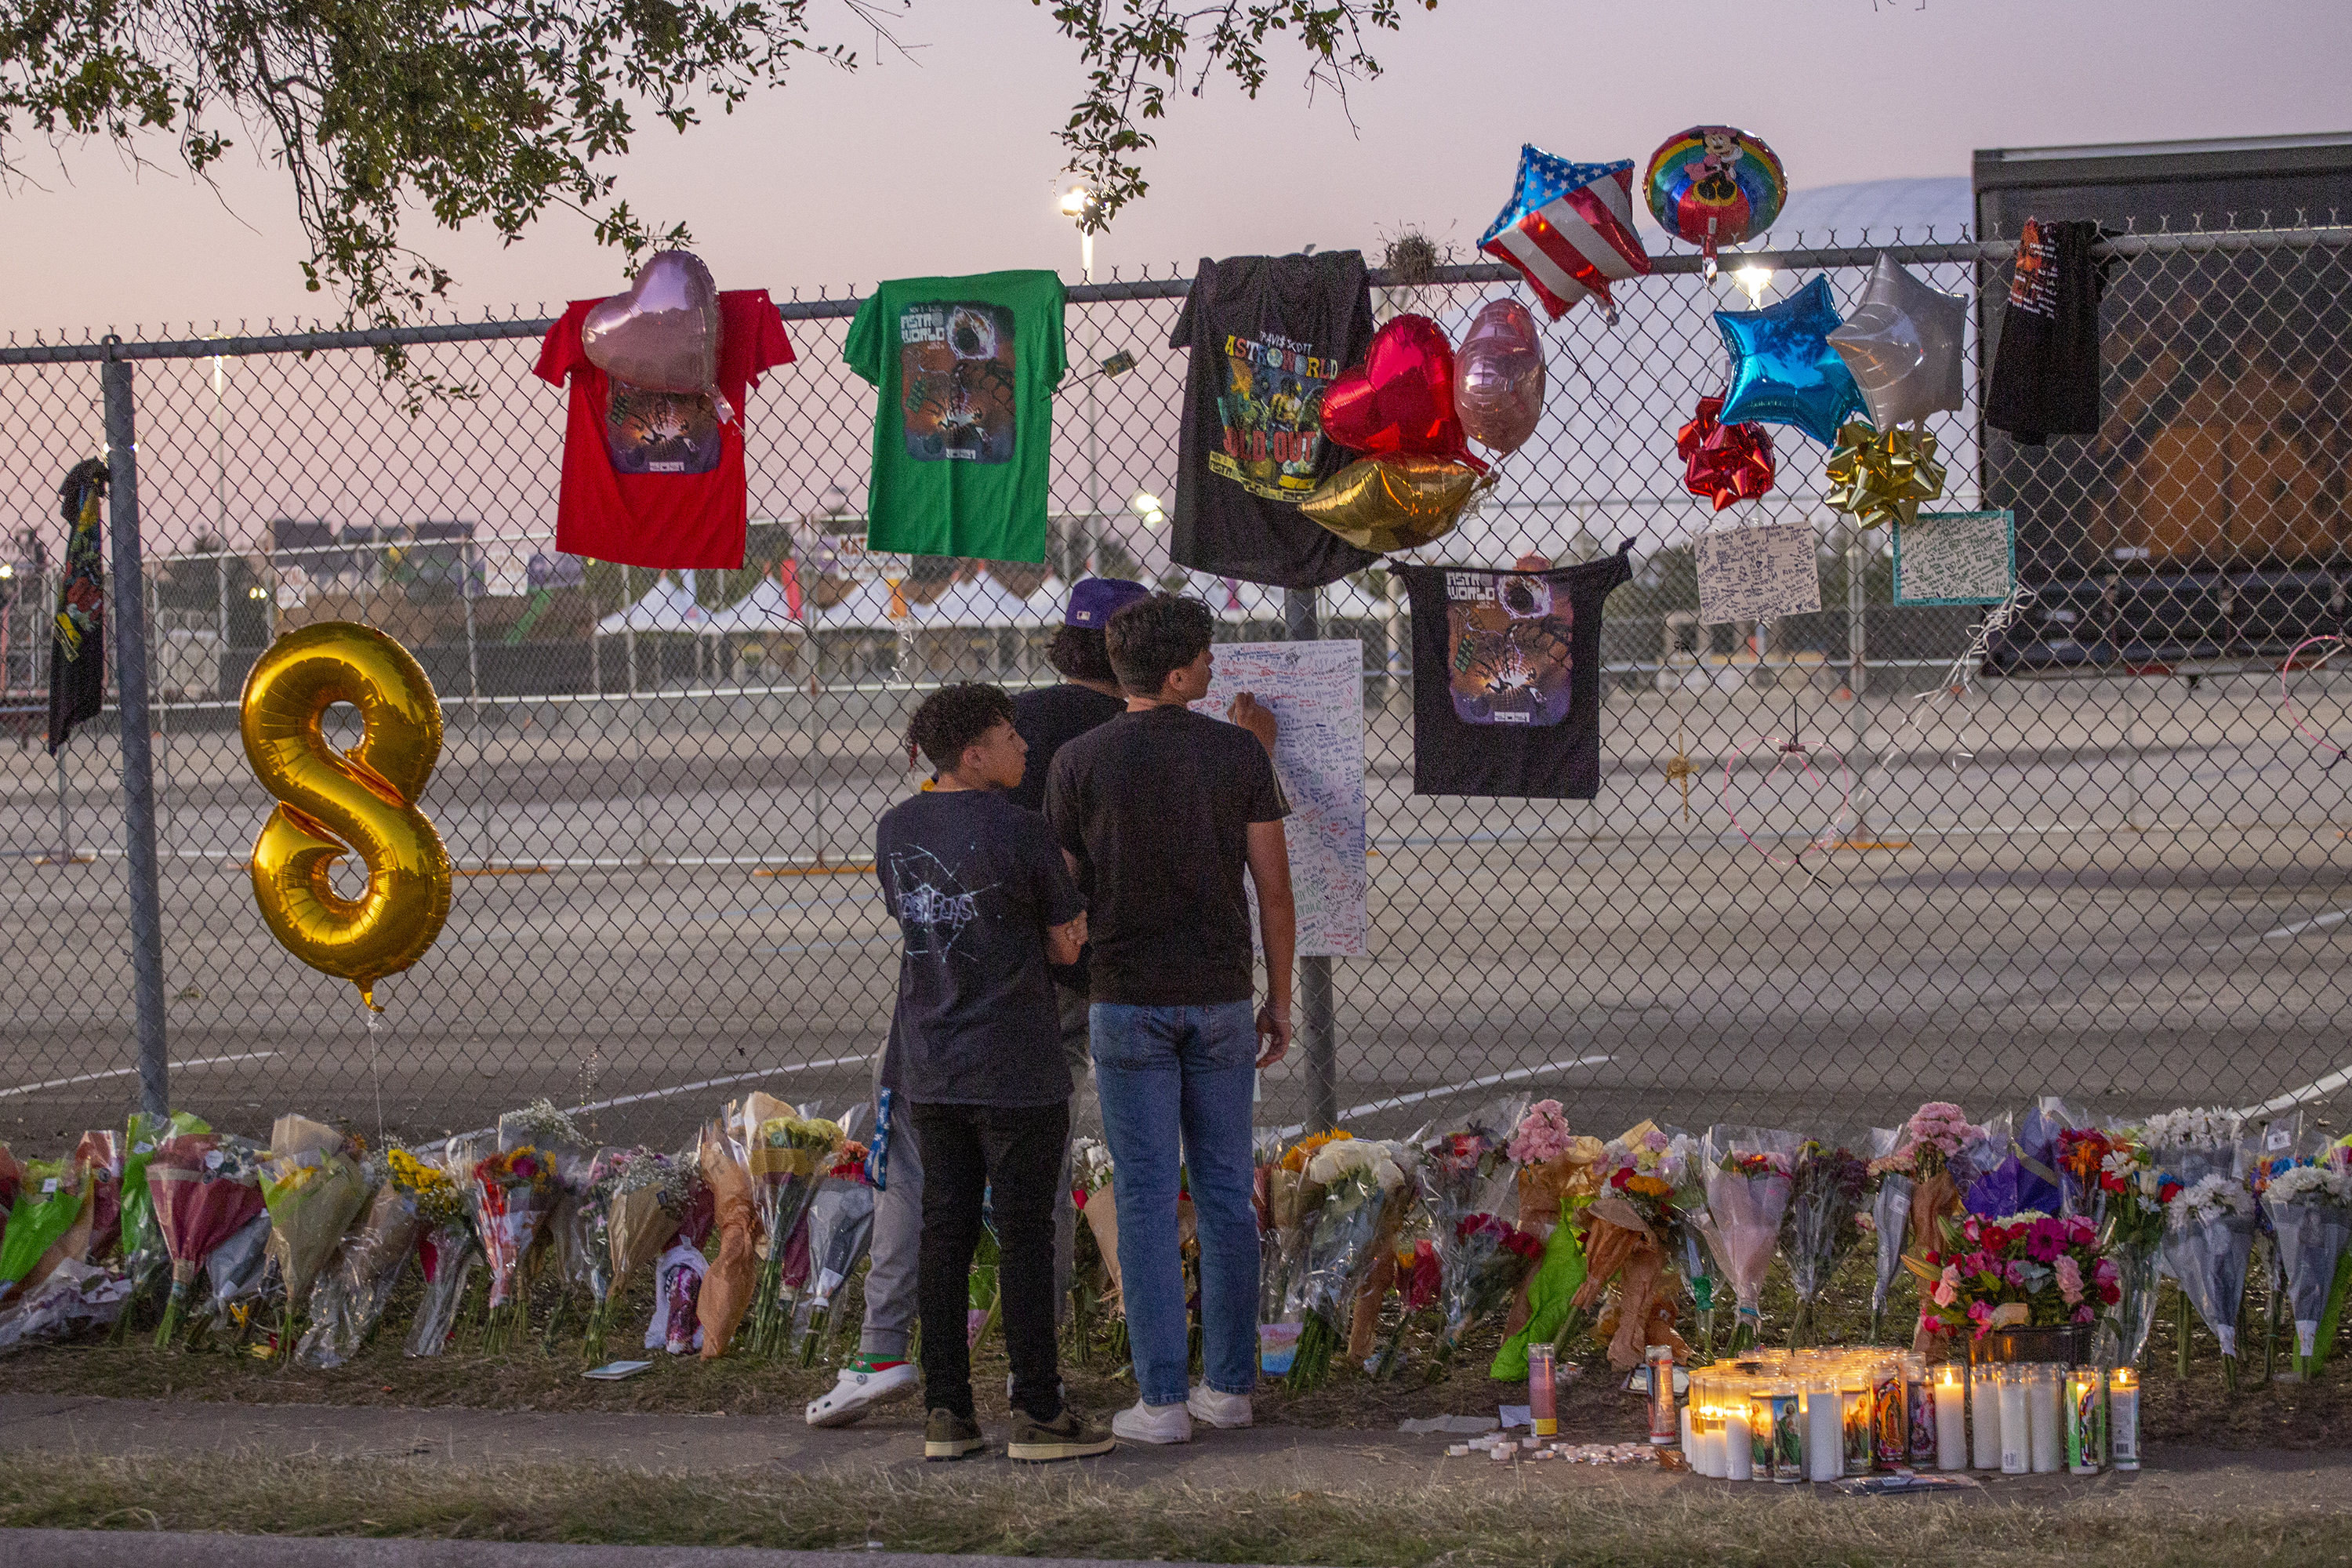 High school friends who attended the Travis Scott concert, Isaac Hernandez and Matthias Coronel, watch Jesus Martinez sign a remembrance board at a makeshift memorial on Nov. 7, 2021, at the NRG Park grounds